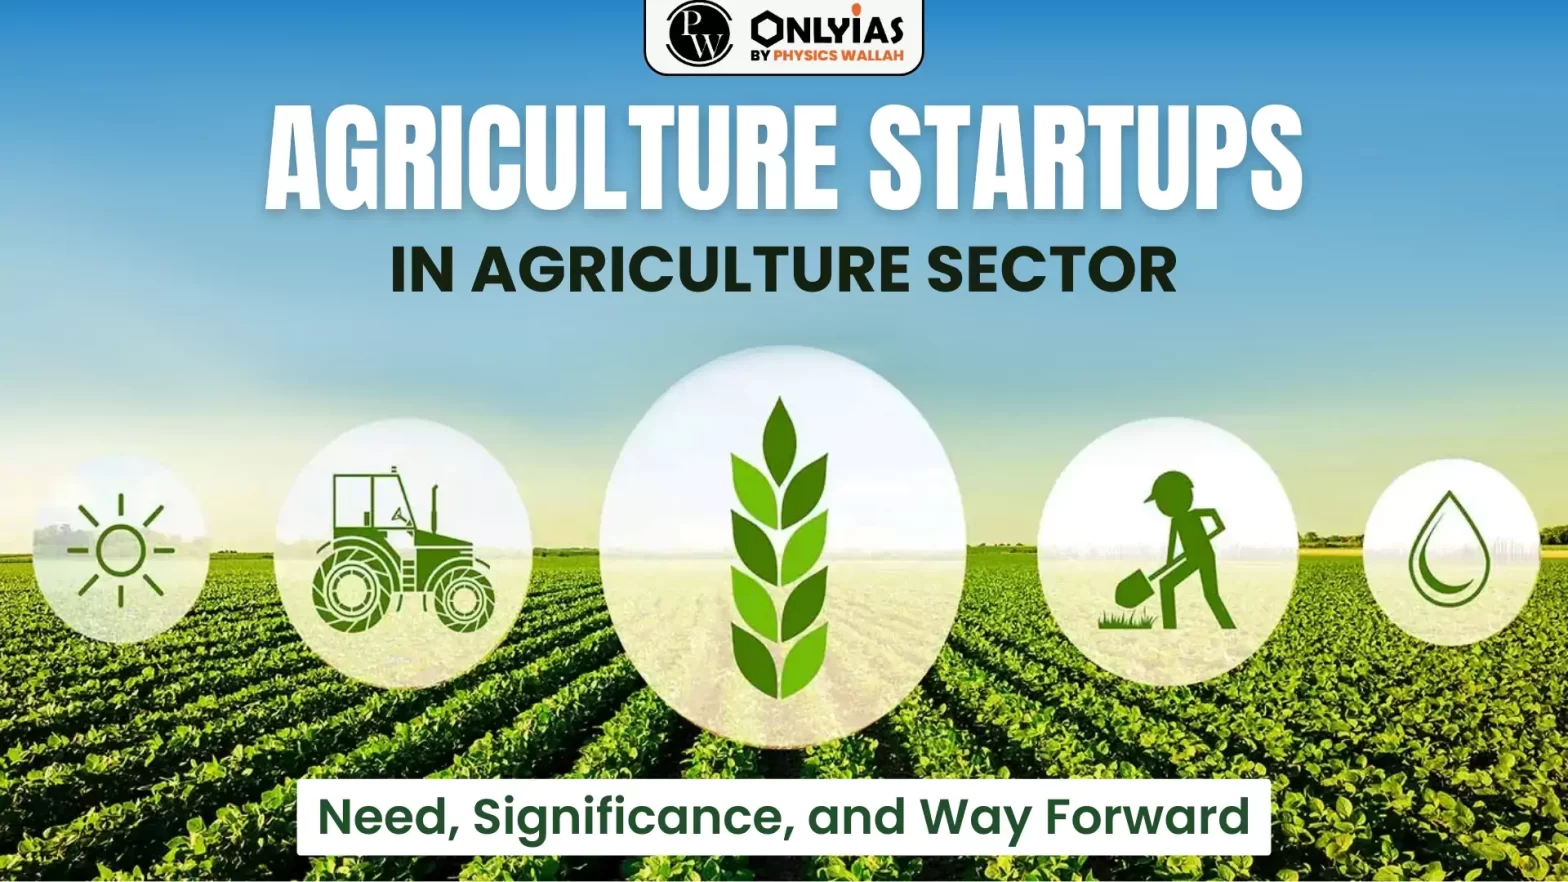 Agriculture Startups In Agriculture Sector: Need, Significance, and Way Forward